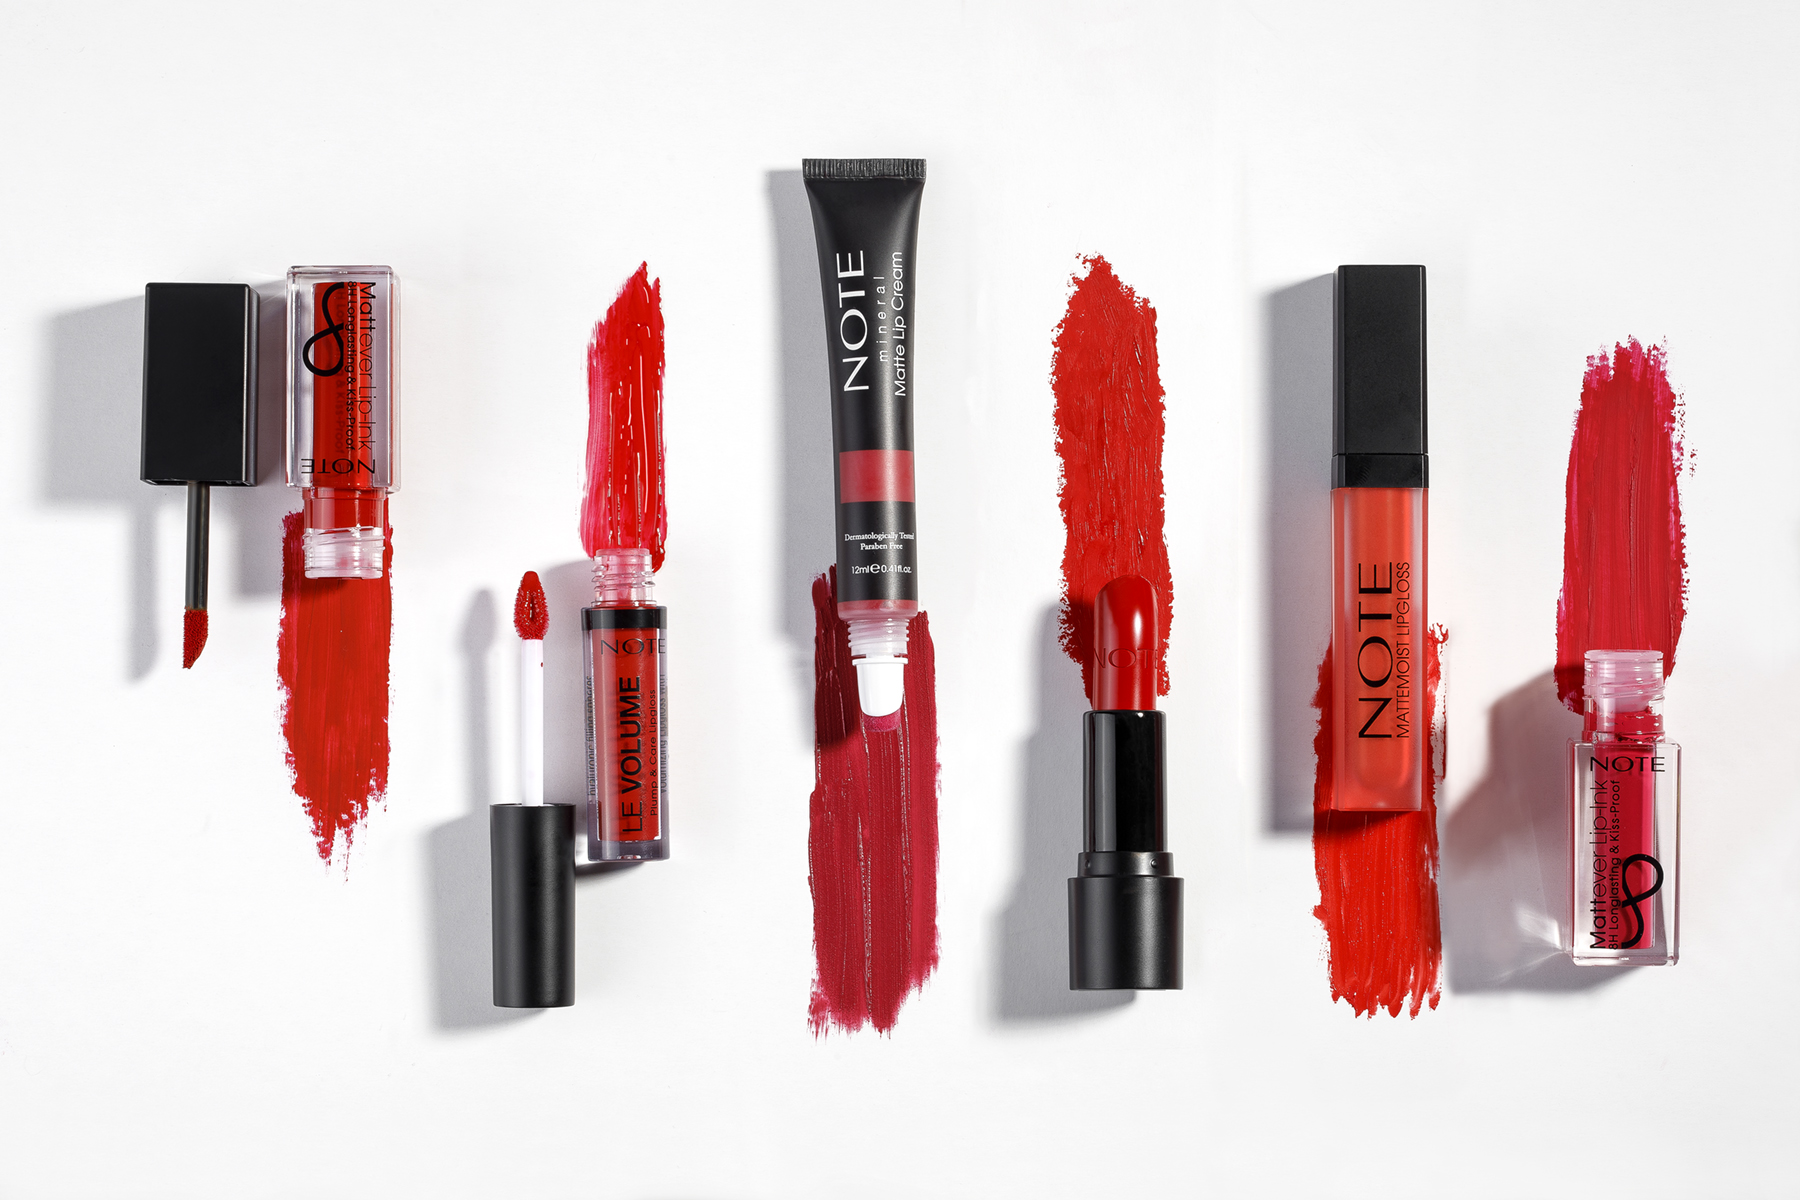 Range of Red NOTE Cosmétique Lipstick products